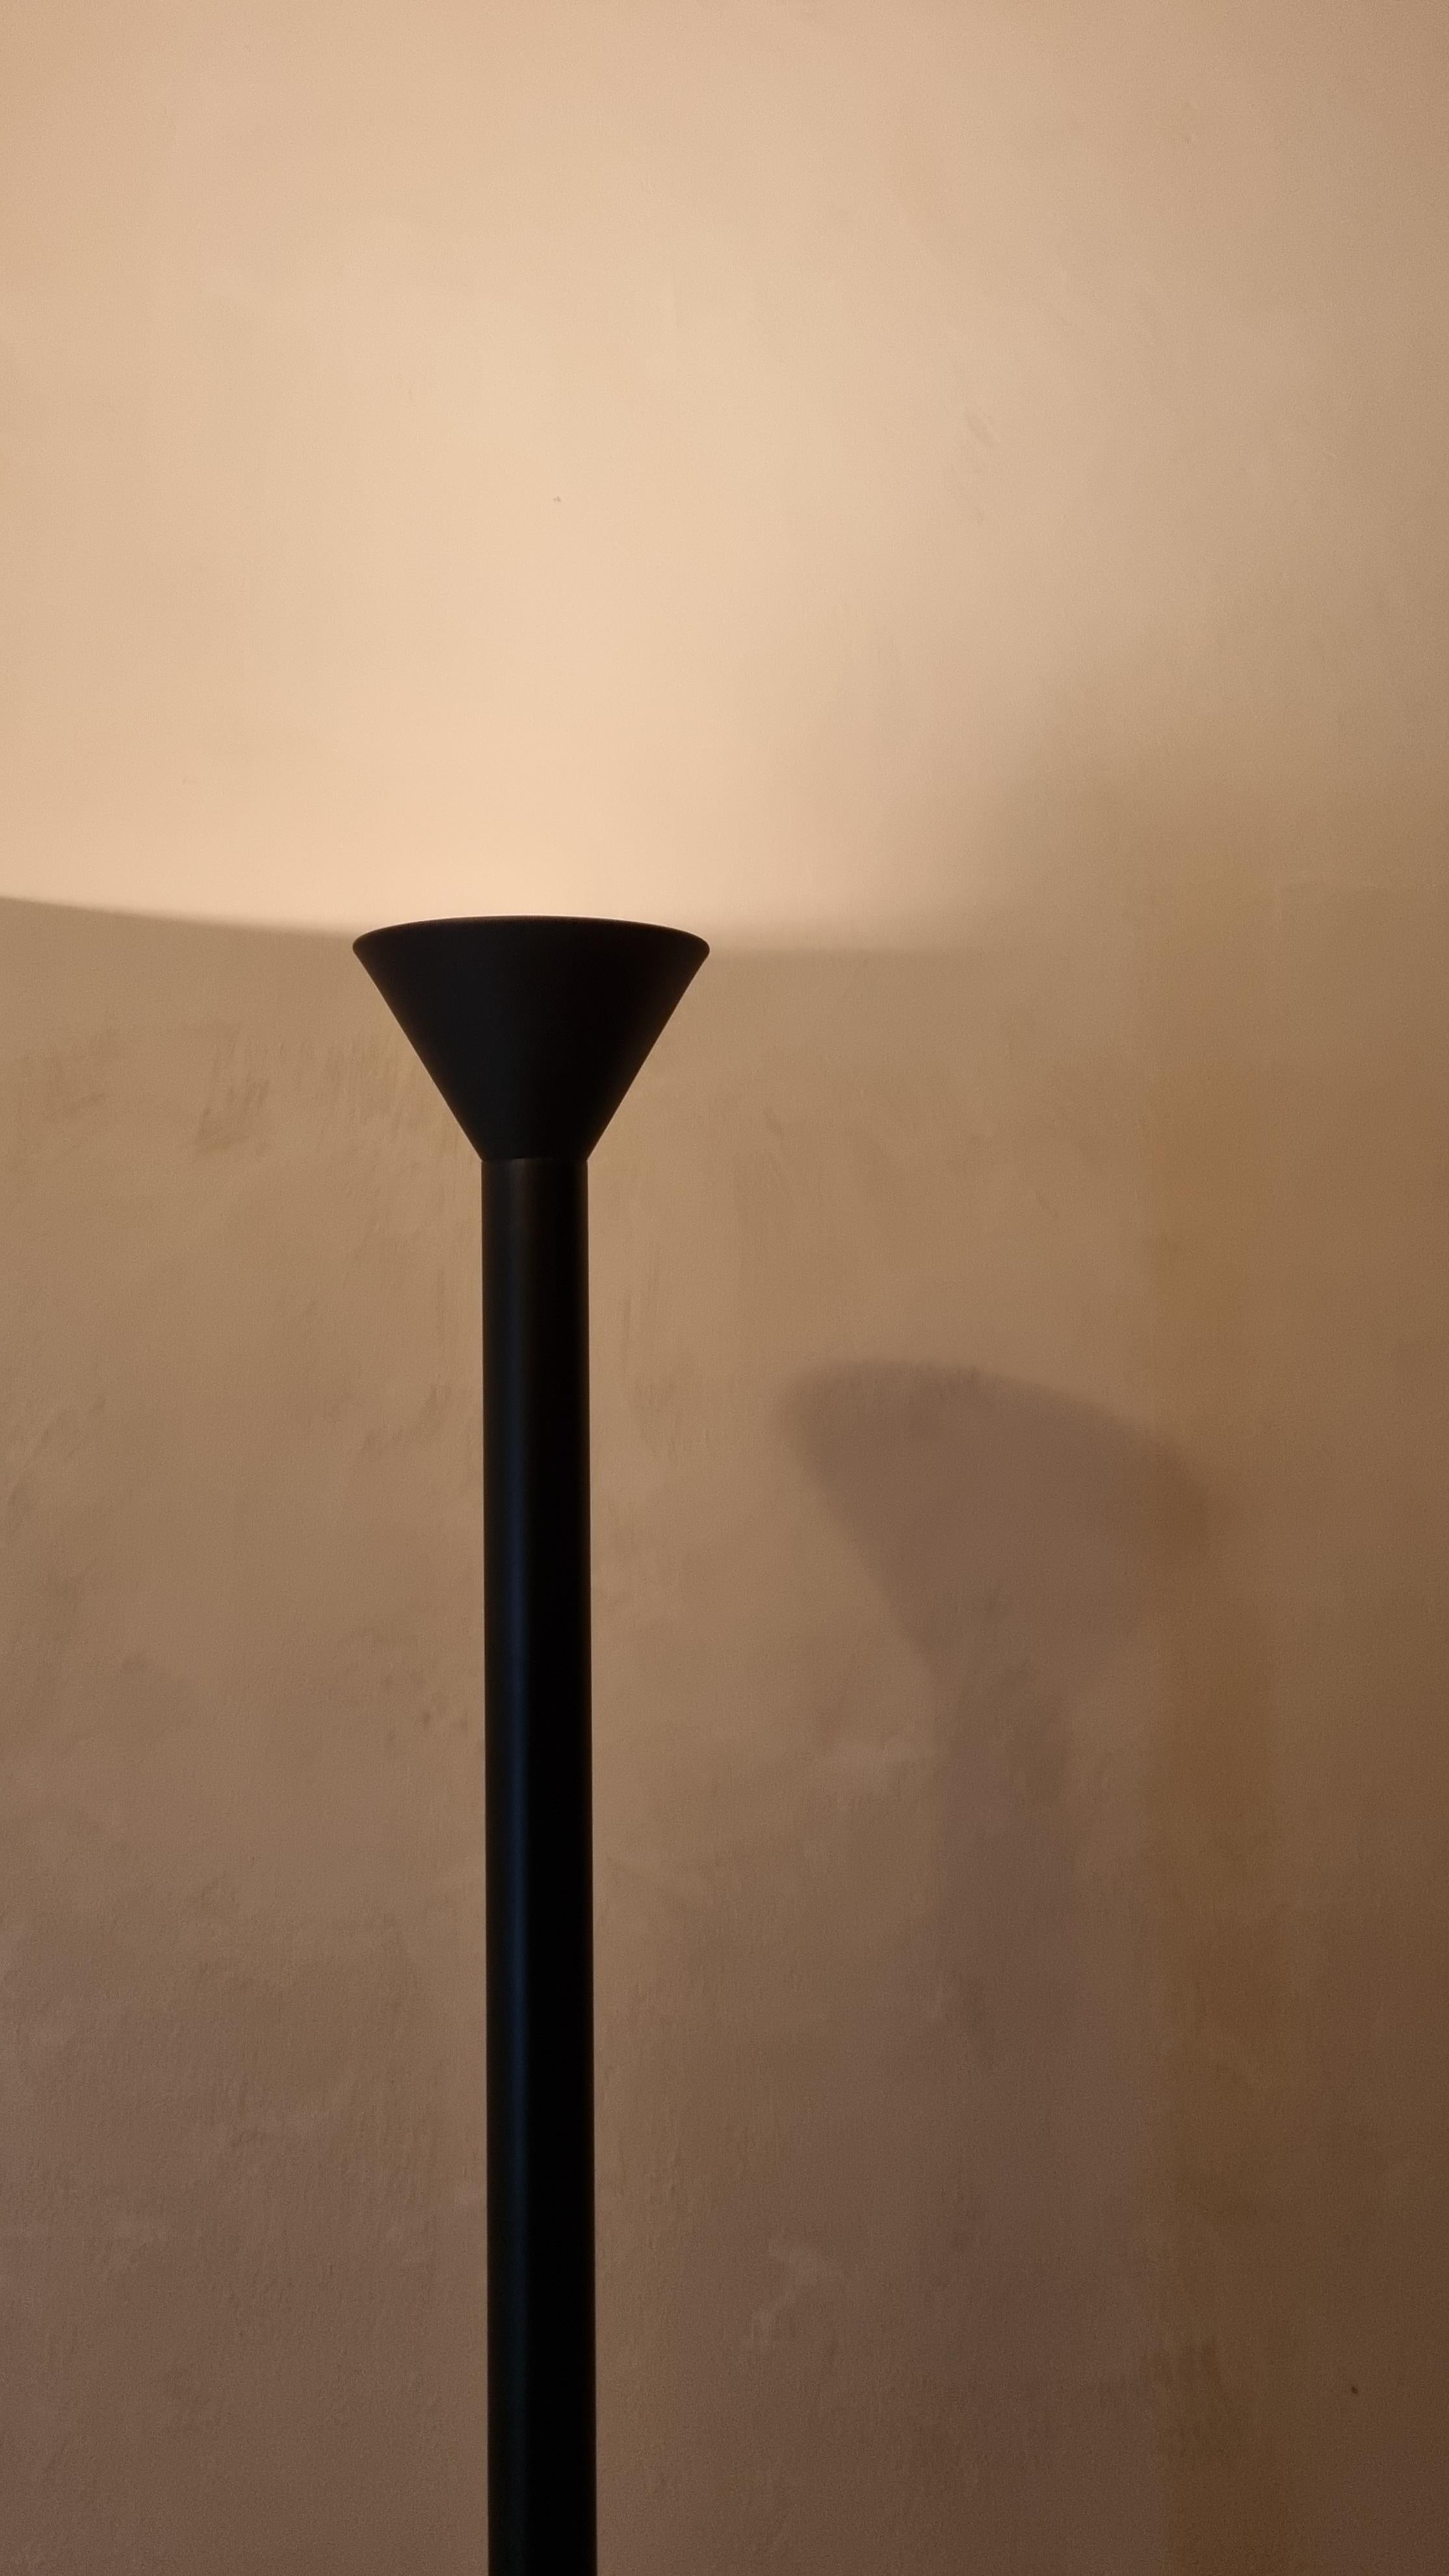 Callimaco floor lamp mod. designed by Ettore Sottsass in 1982 for Artemide.
Limited edition, black version, emblematic lamp of Sottsass Radical Design that brings artistic and conceptual research on everyday objects, transforming them into